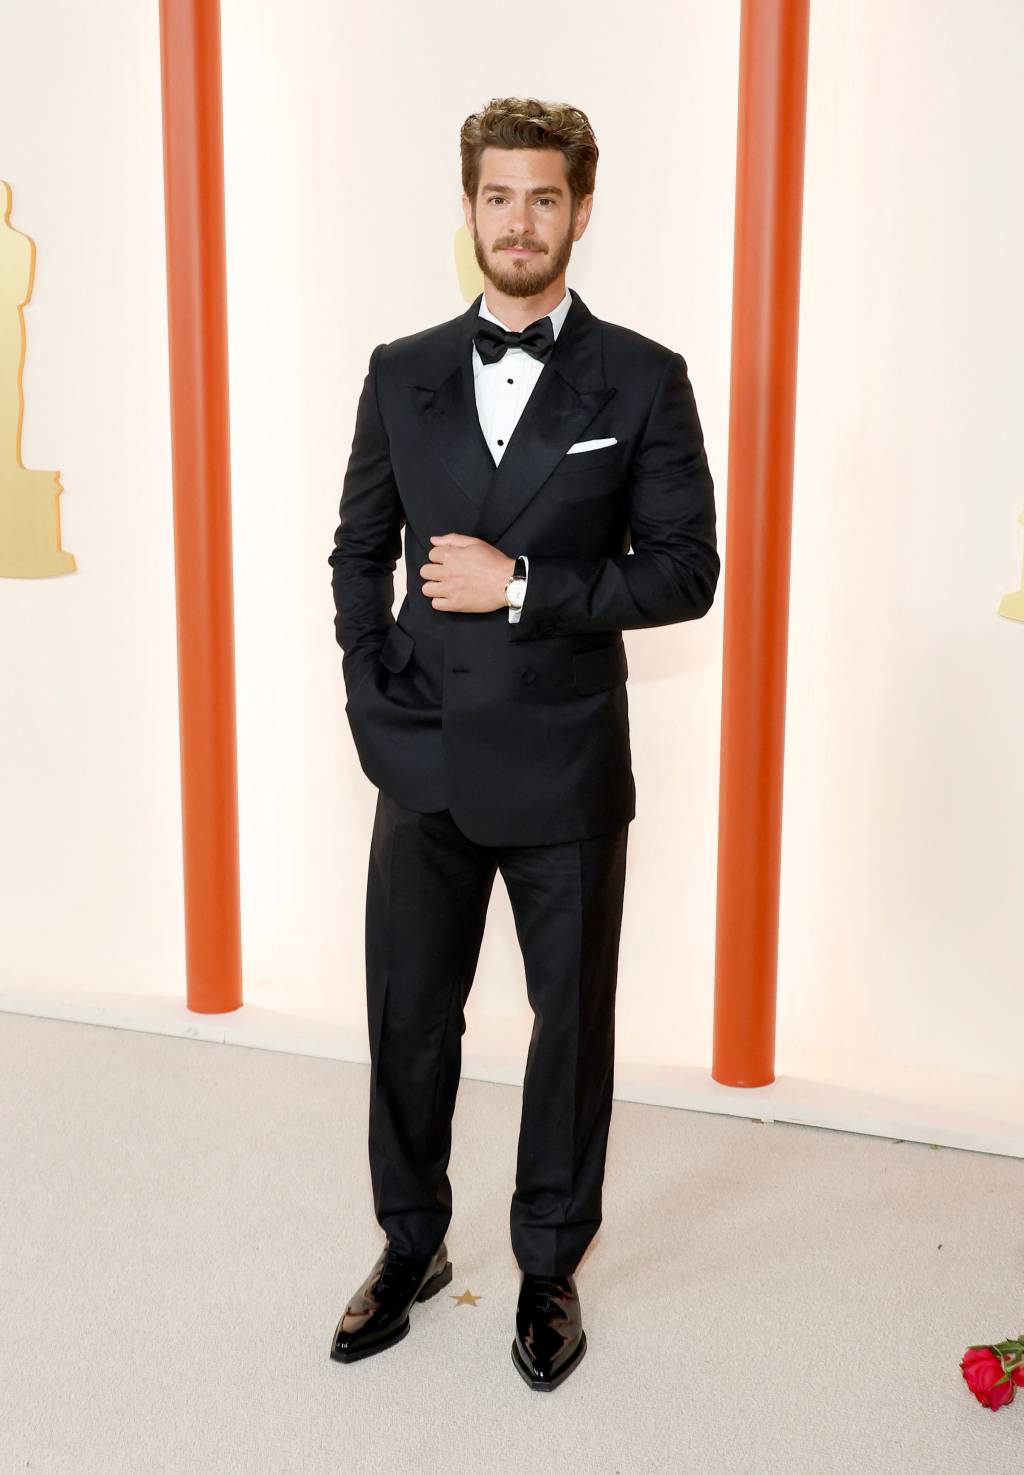 HOLLYWOOD, CALIFORNIA - MARCH 12: Andrew Garfield attends the 95th Annual Academy Awards on March 12, 2023 in Hollywood, California. Mike Coppola/Getty Images/AFP (Photo by Mike Coppola / GETTY IMAGES NORTH AMERICA / Getty Images via AFP)